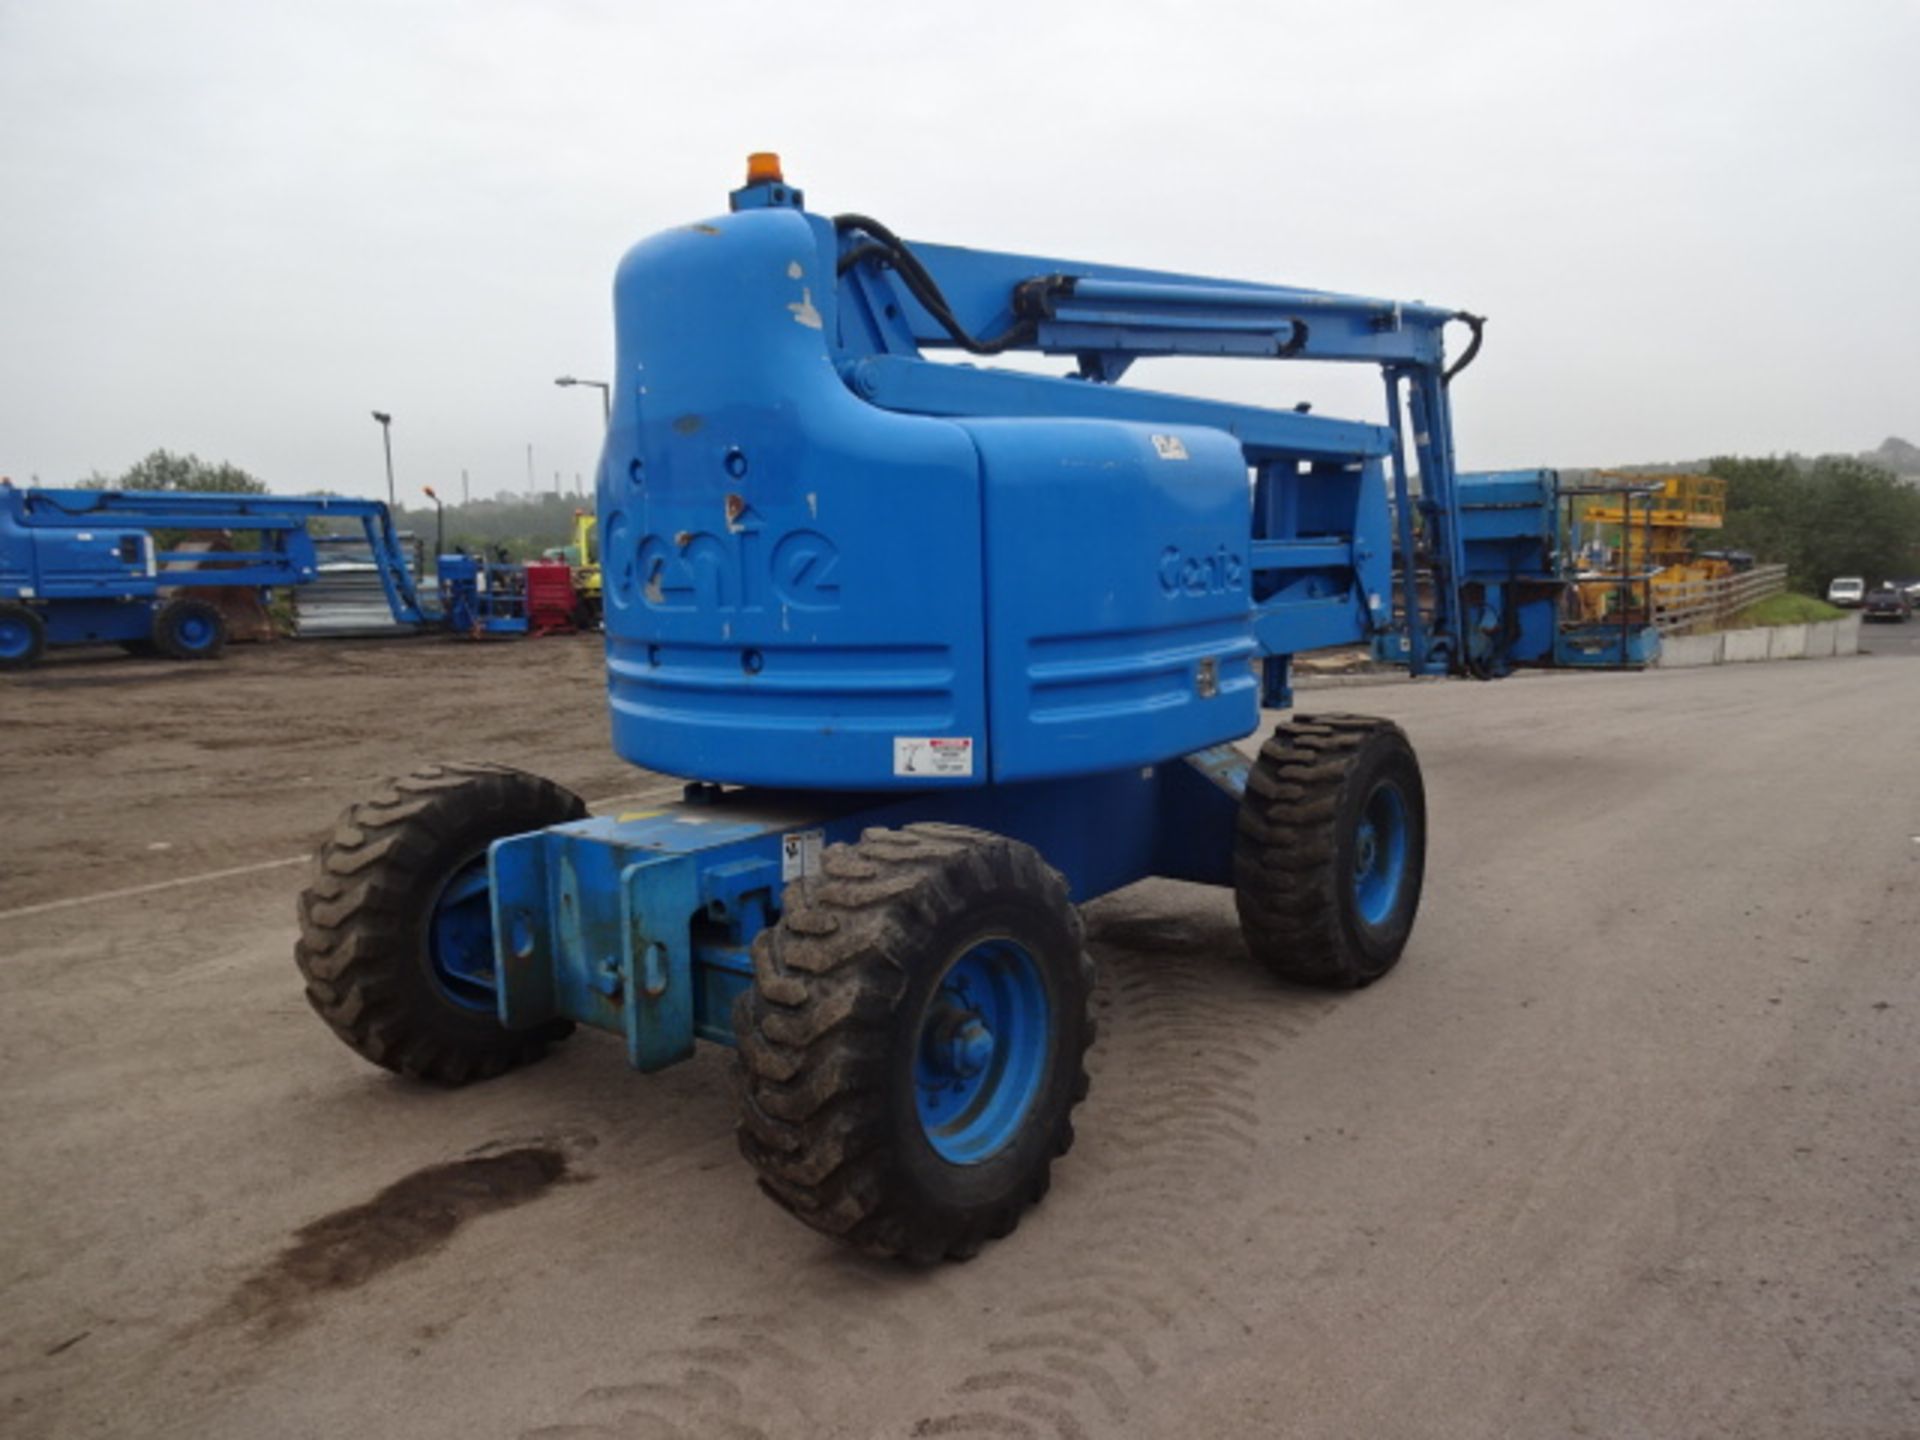 2000 GENIE Z60/34 60' articulated boom lift S/n: Z60-2326 with fly jib (RDL) - Image 4 of 10